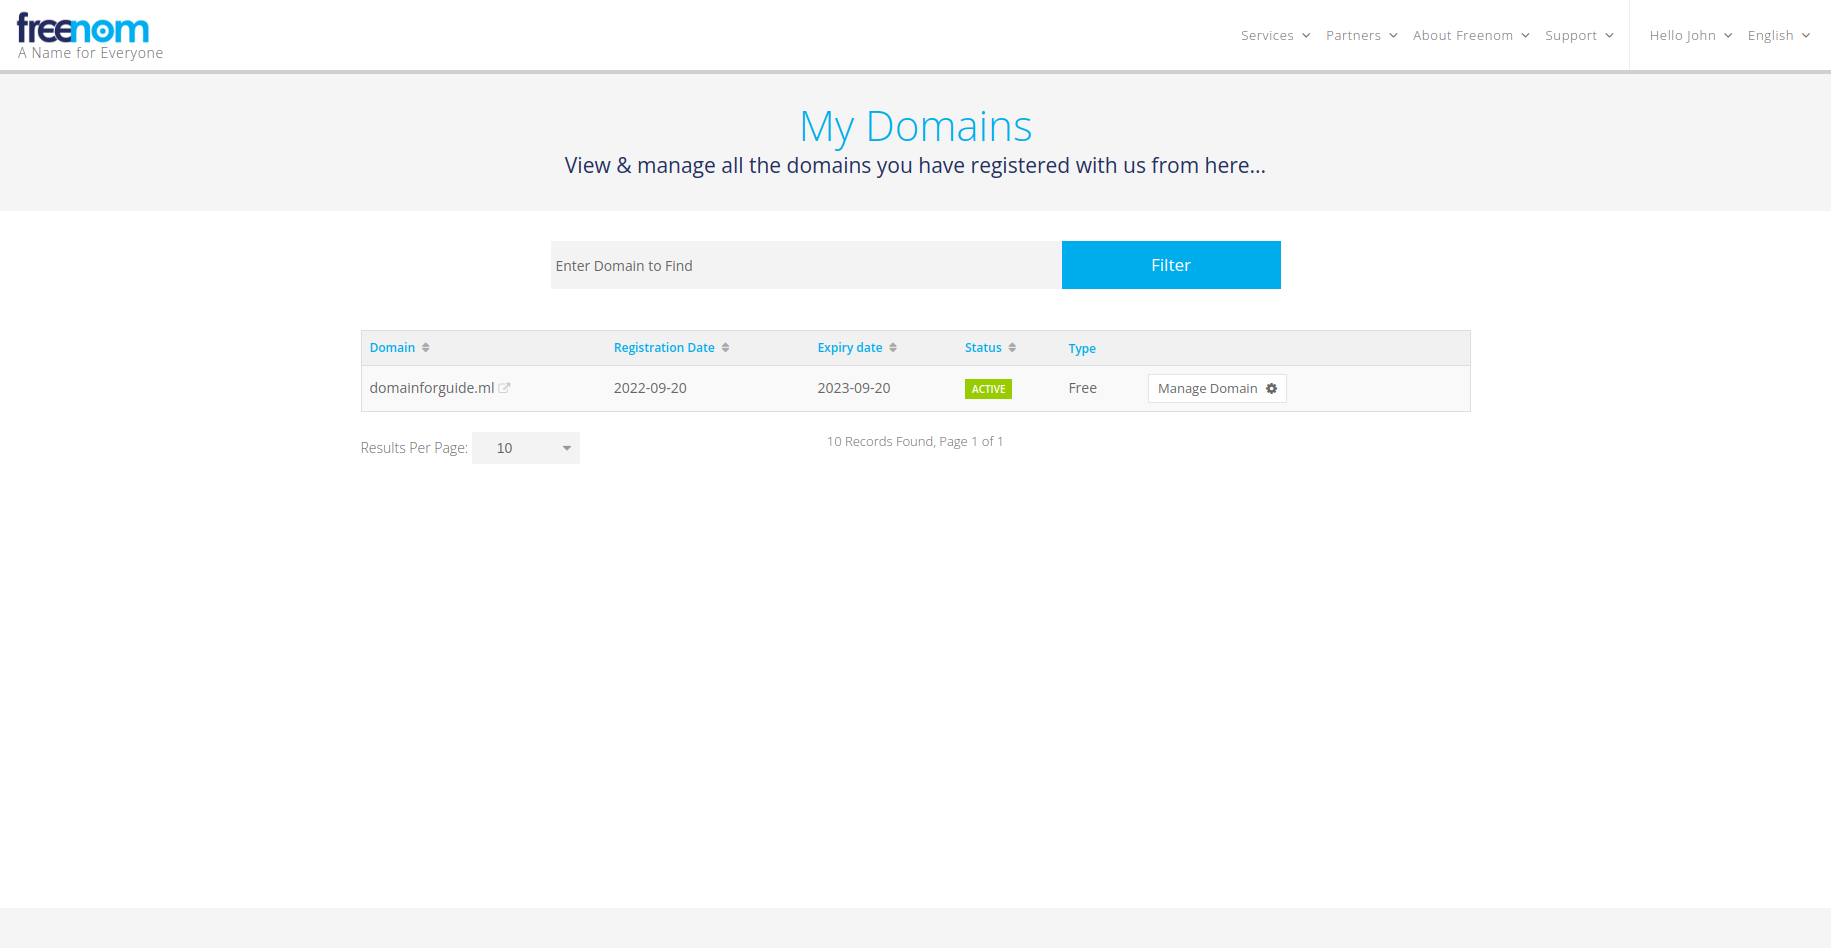 The domain appears in your domains list.